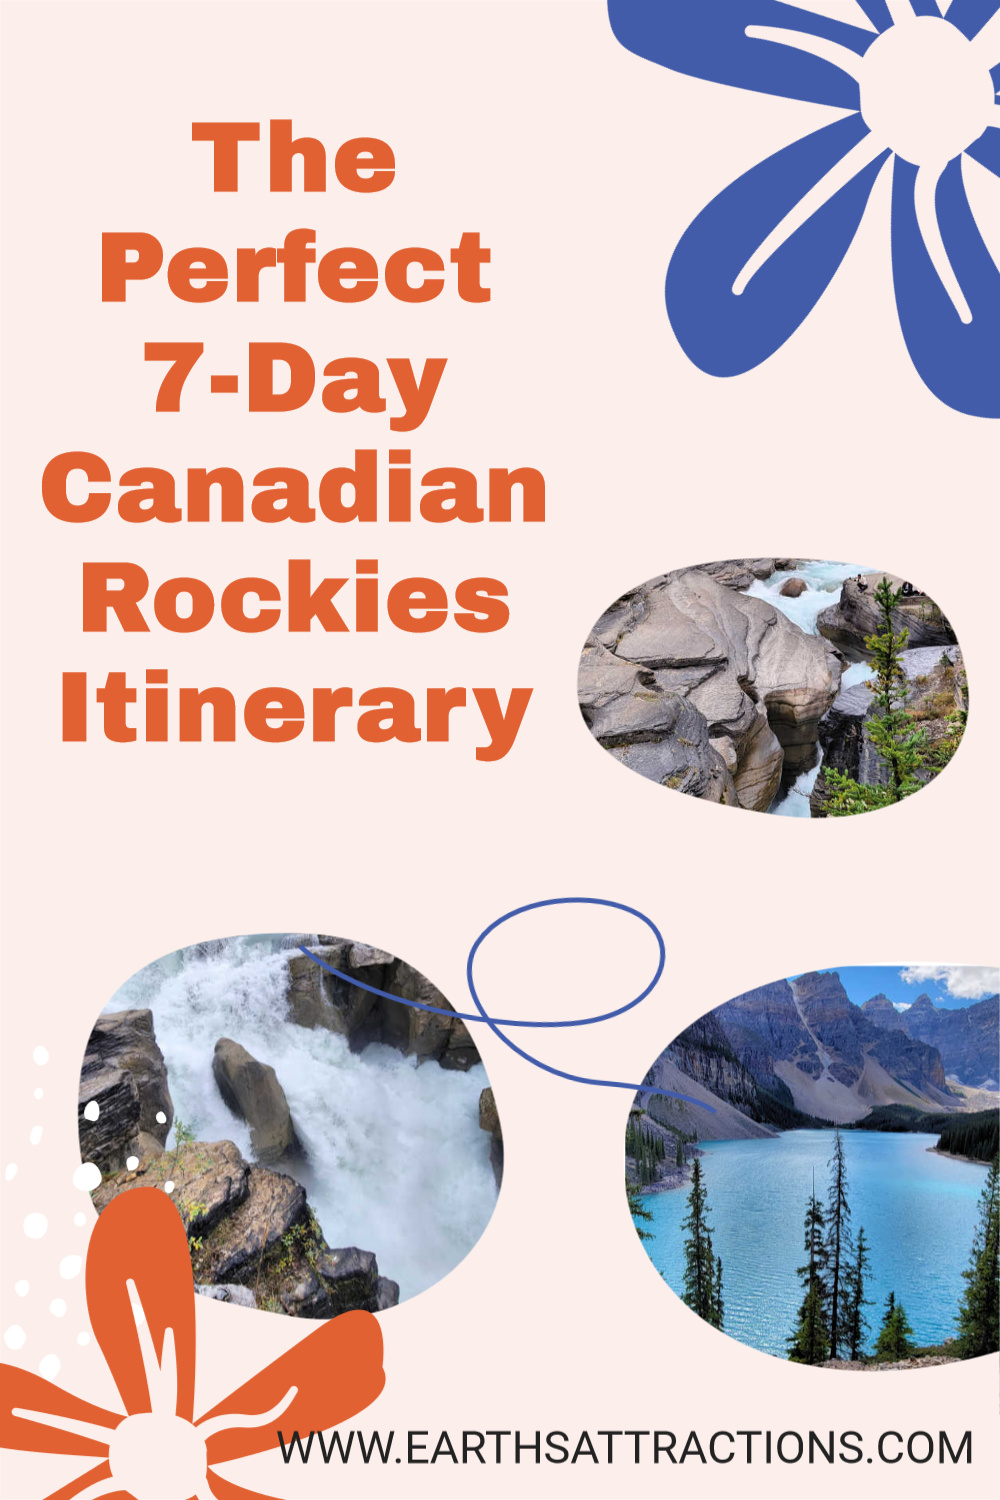 Discover the perfect 7-day Canadian Rockies itinerary. Here are the best things to do in 7 days in the Canadian Rockies. #canada #canadianrockies #rockies #outdoor #jasper #banff #northamerica #northamericatravel #canadatravel #traveldestinations